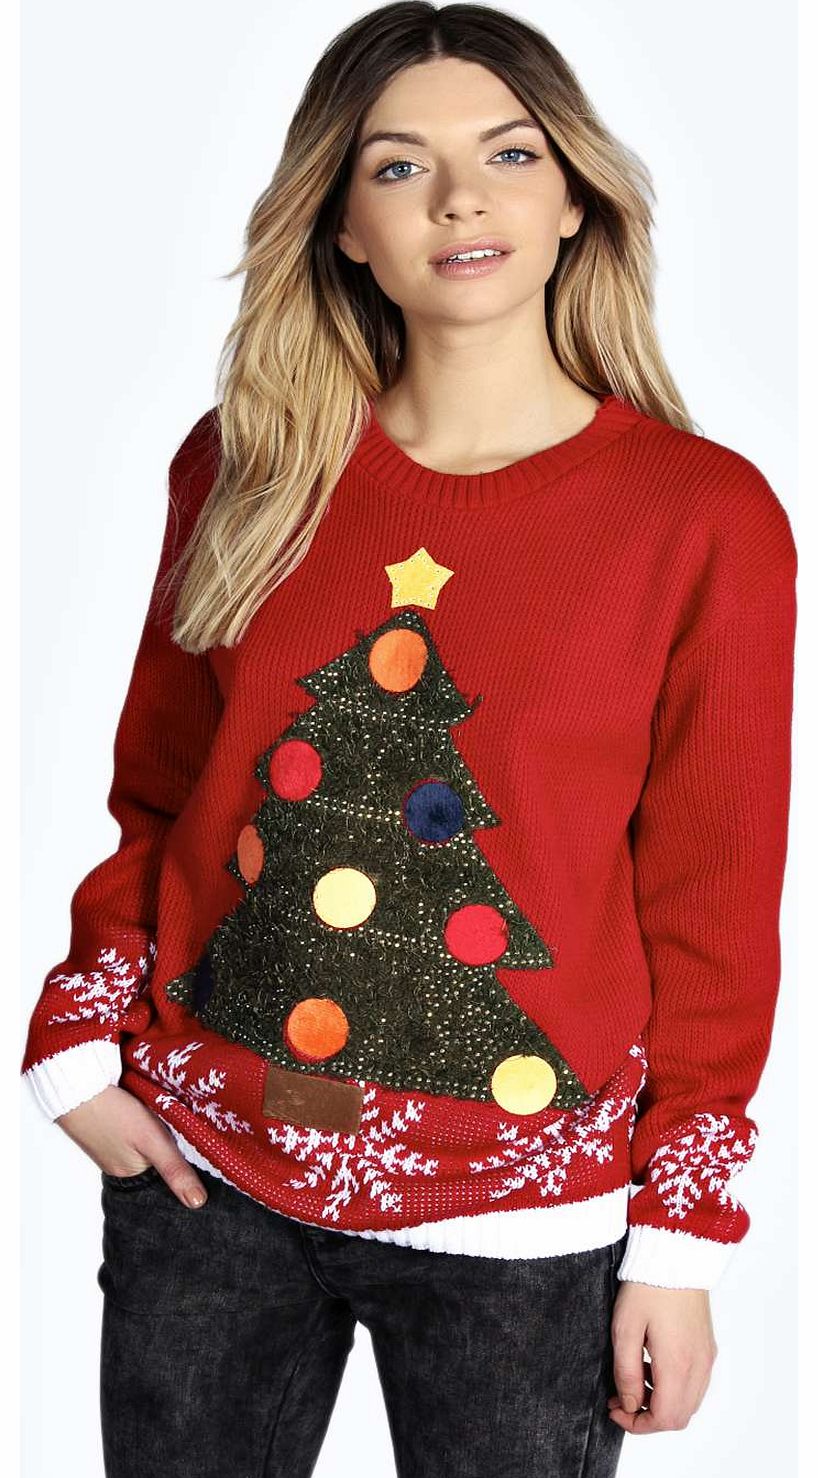 Molly Embellished Christmas Tree Jumper - red